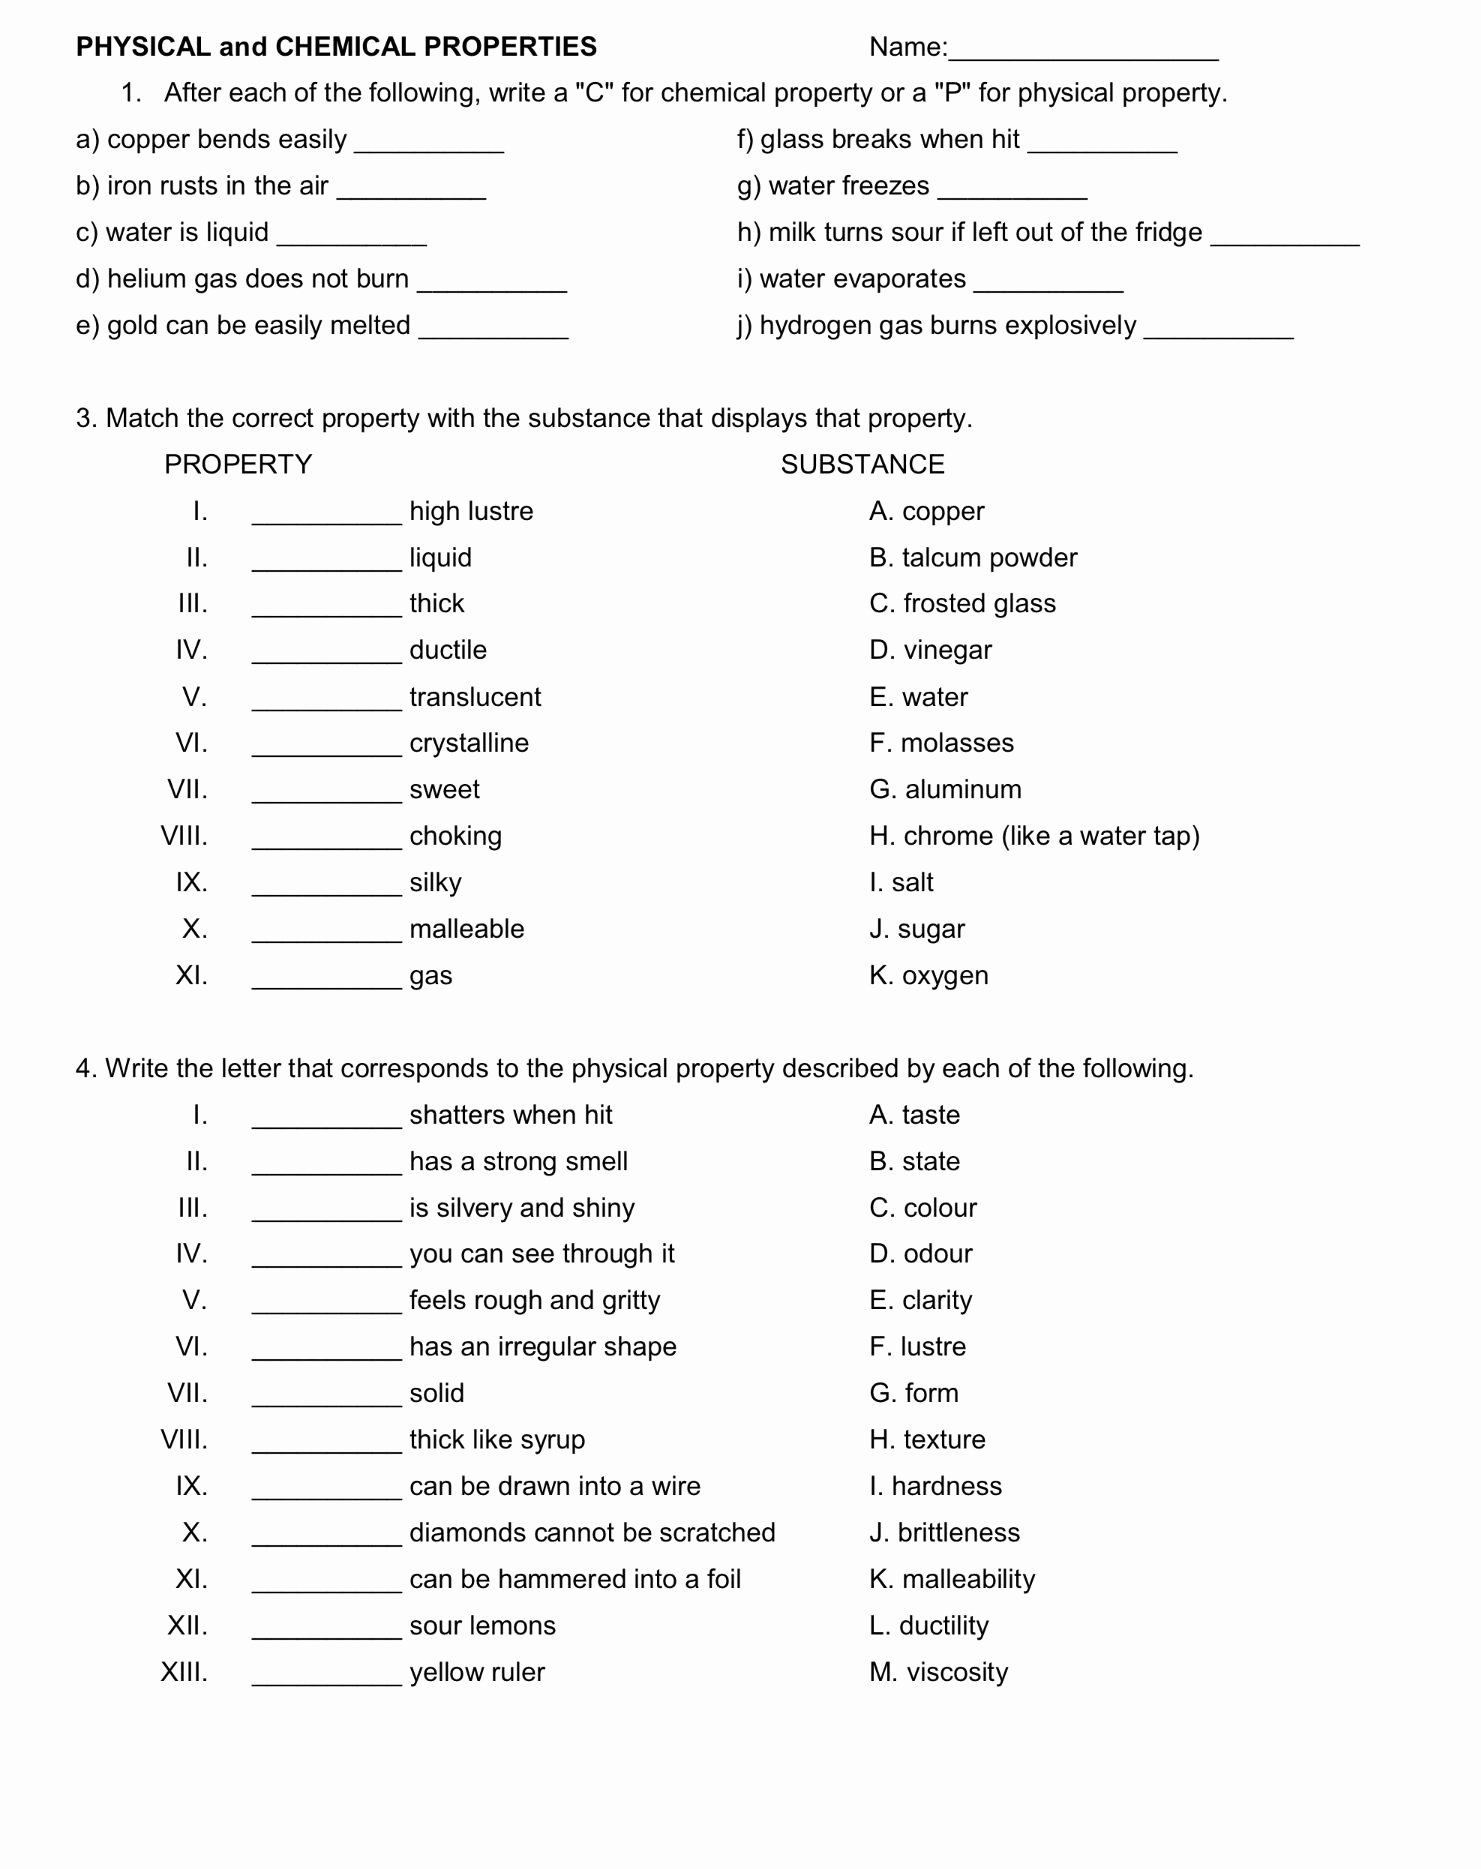 Physical and Chemical Properties Worksheet Luxury Physical and Chemical Properties Worksheet Monday